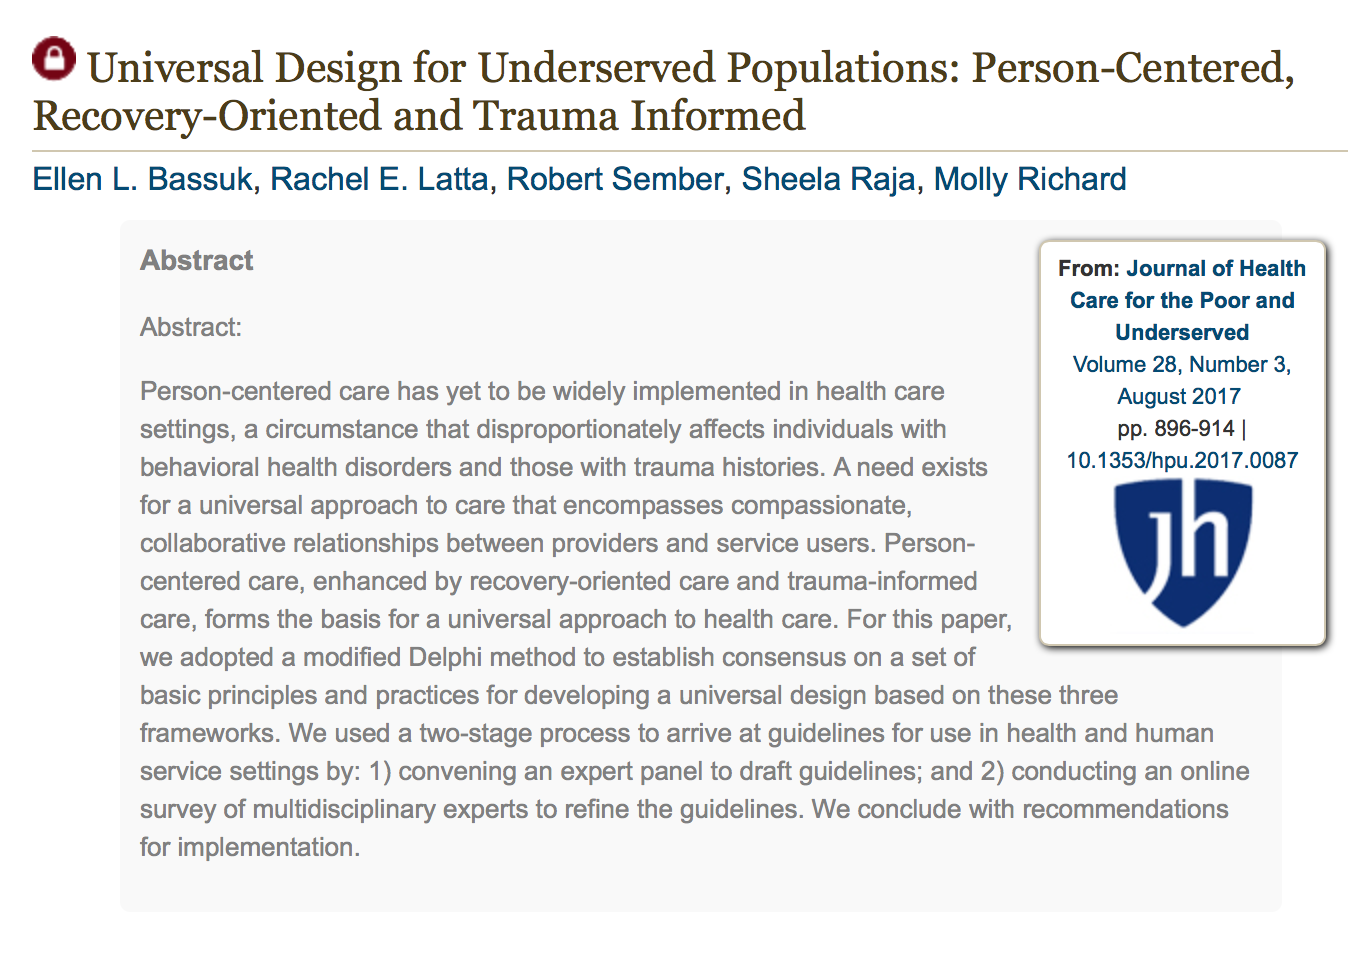 Robert Sember co-authors article on Universal Design for Health Care